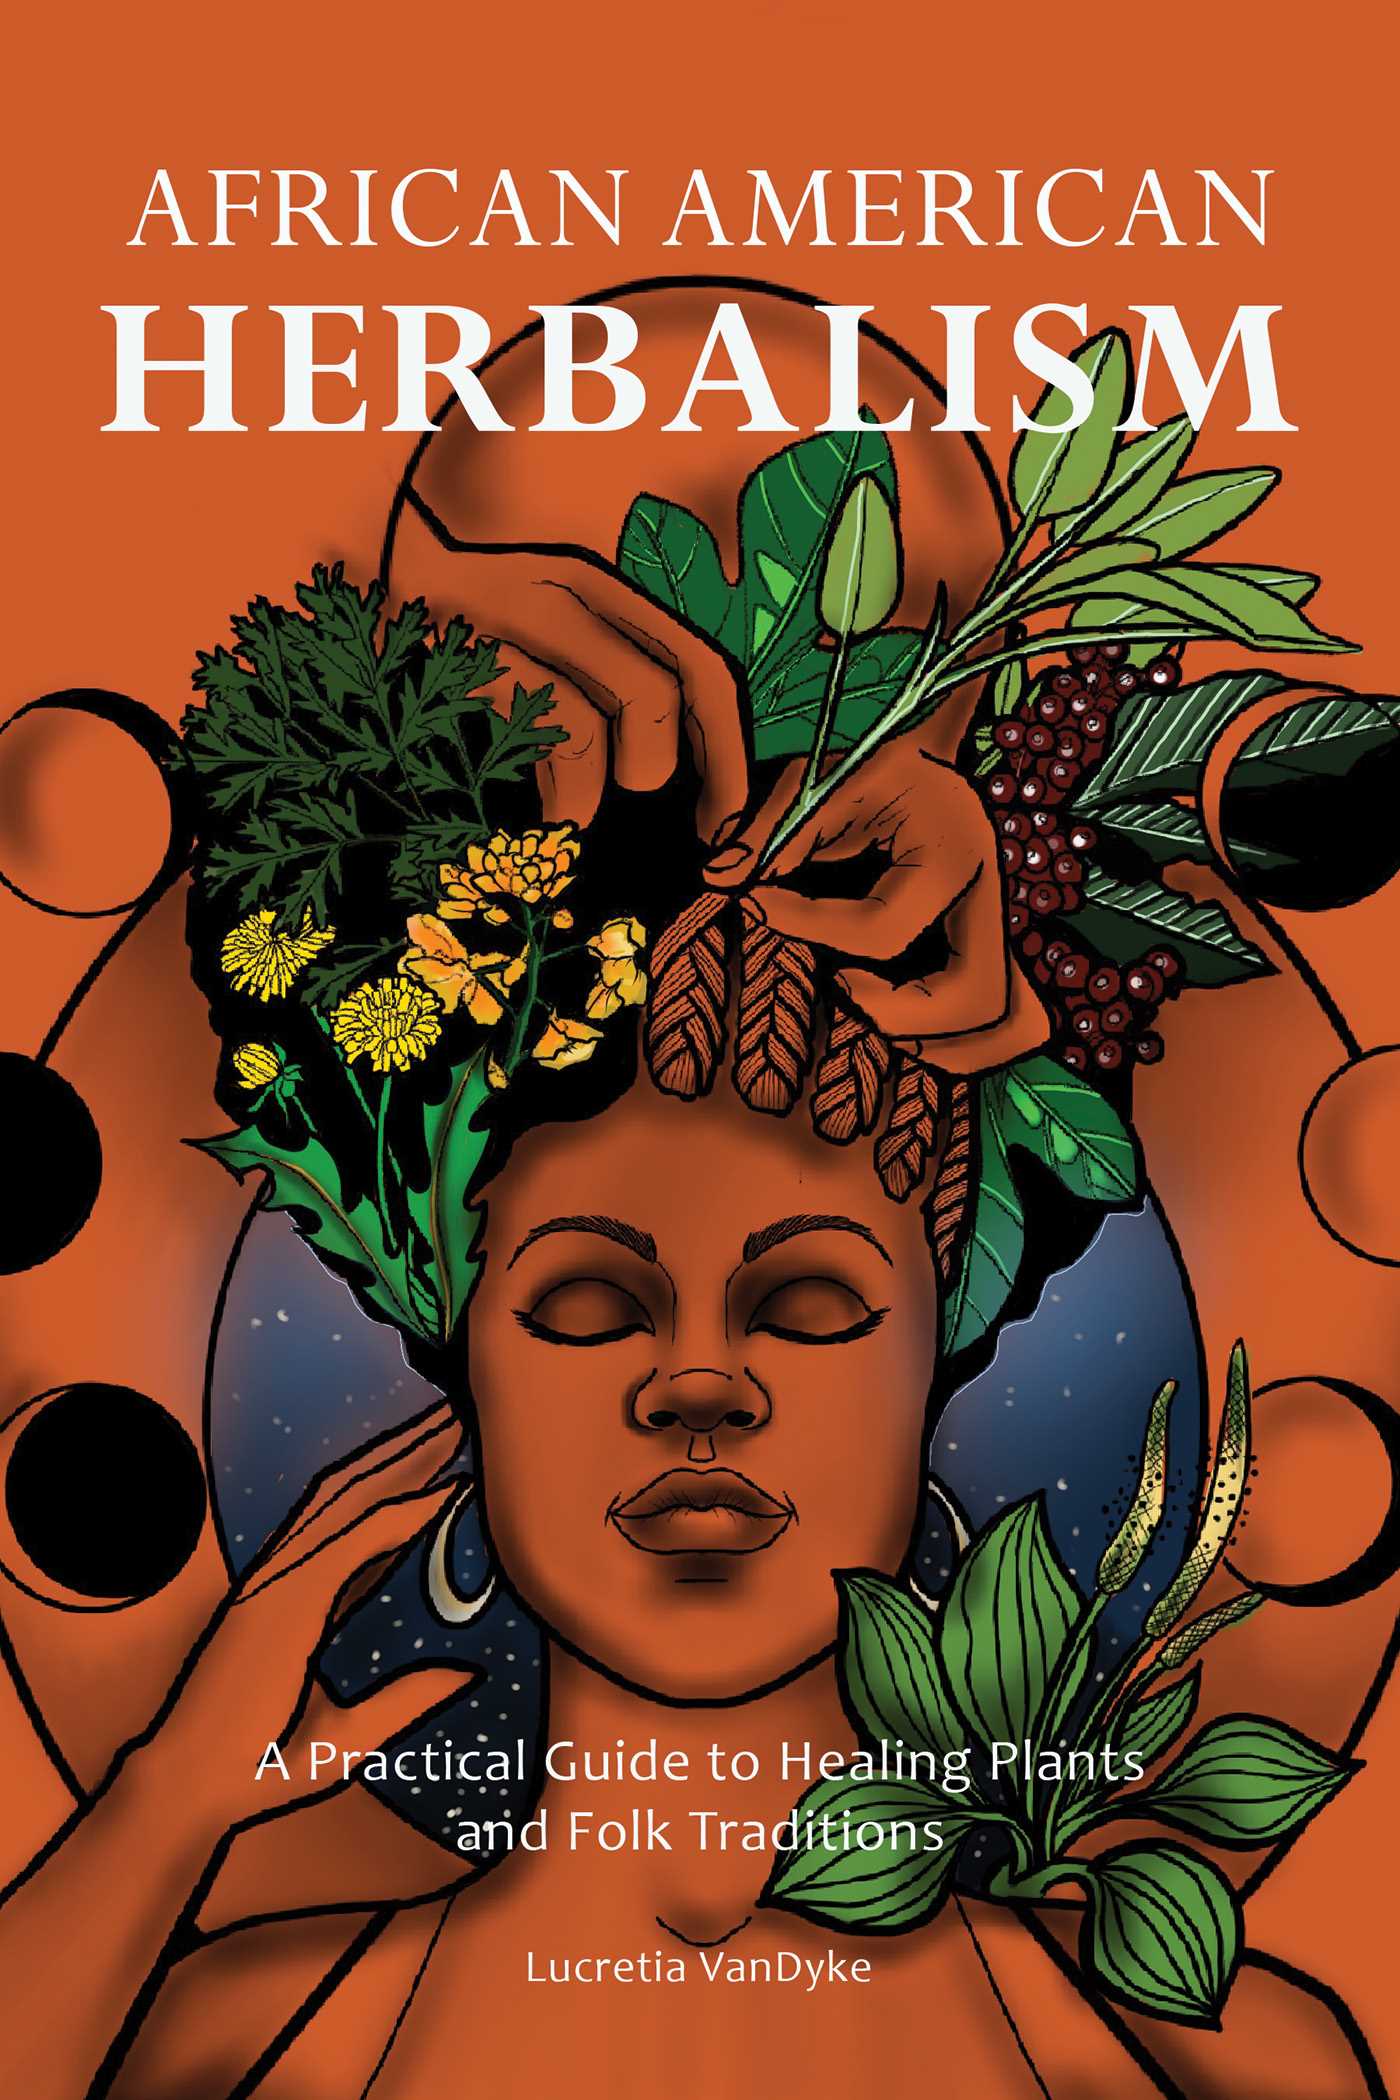 African American Herbalism // A Practical Guide to Healing Plants and Folk Traditions